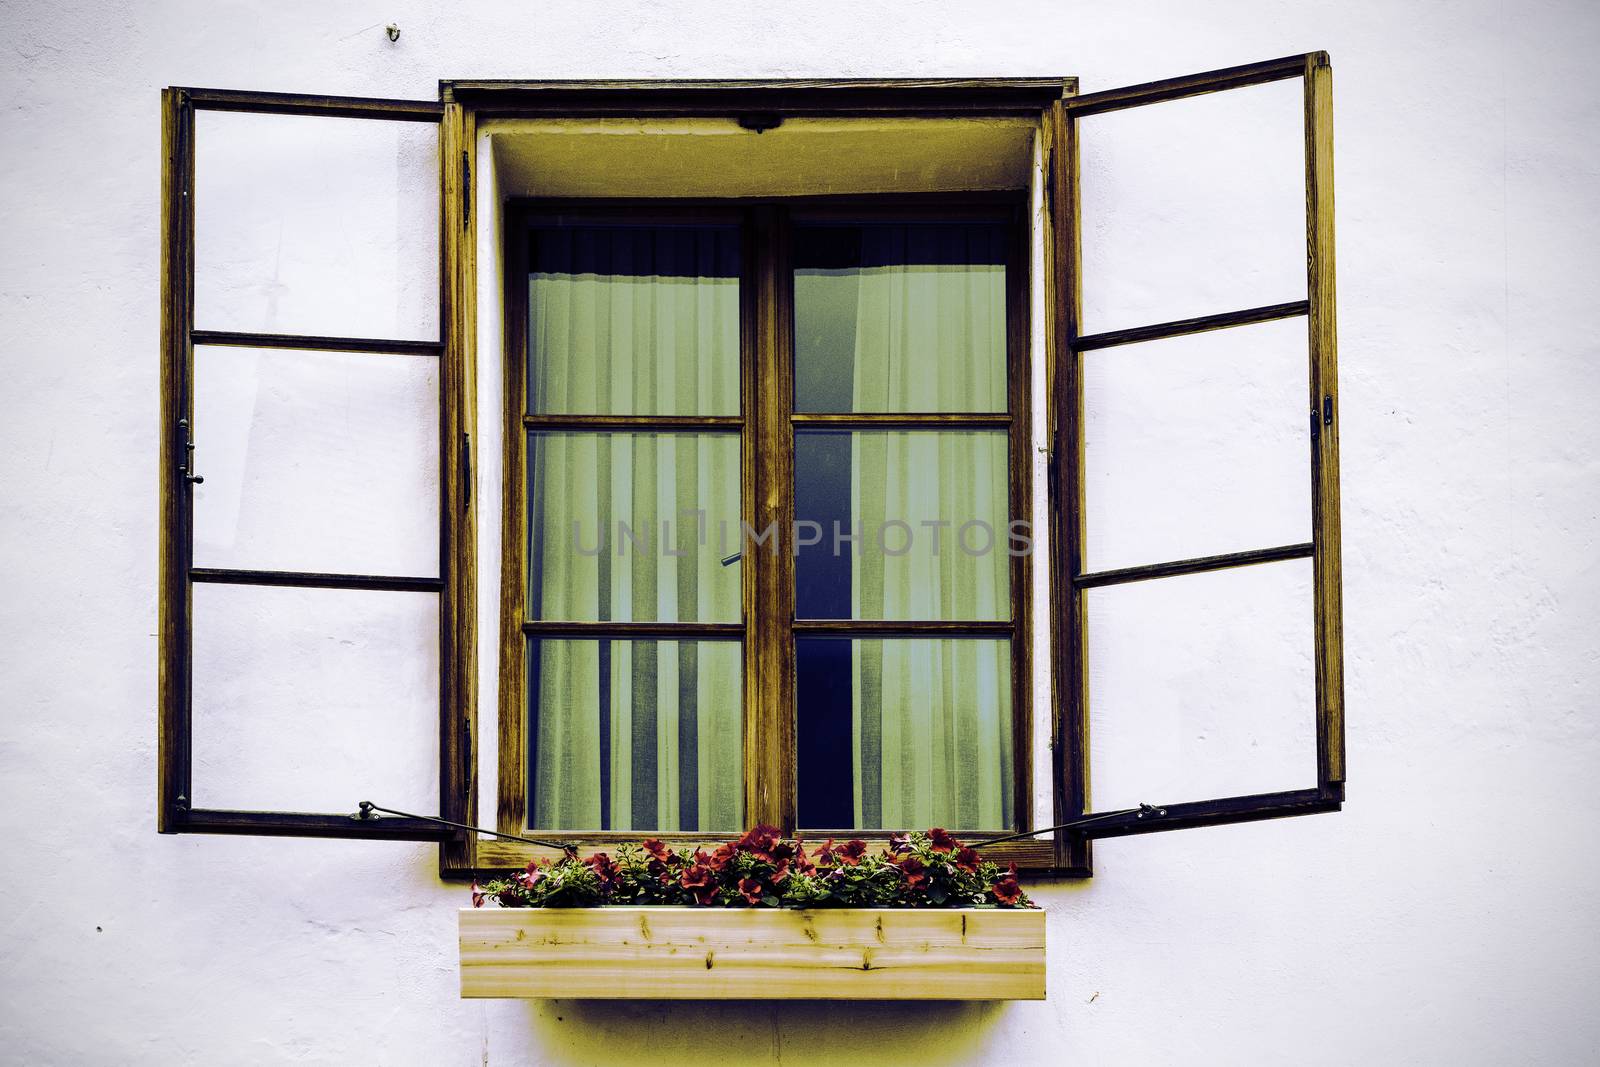 Typical window in Austria. by gkuna